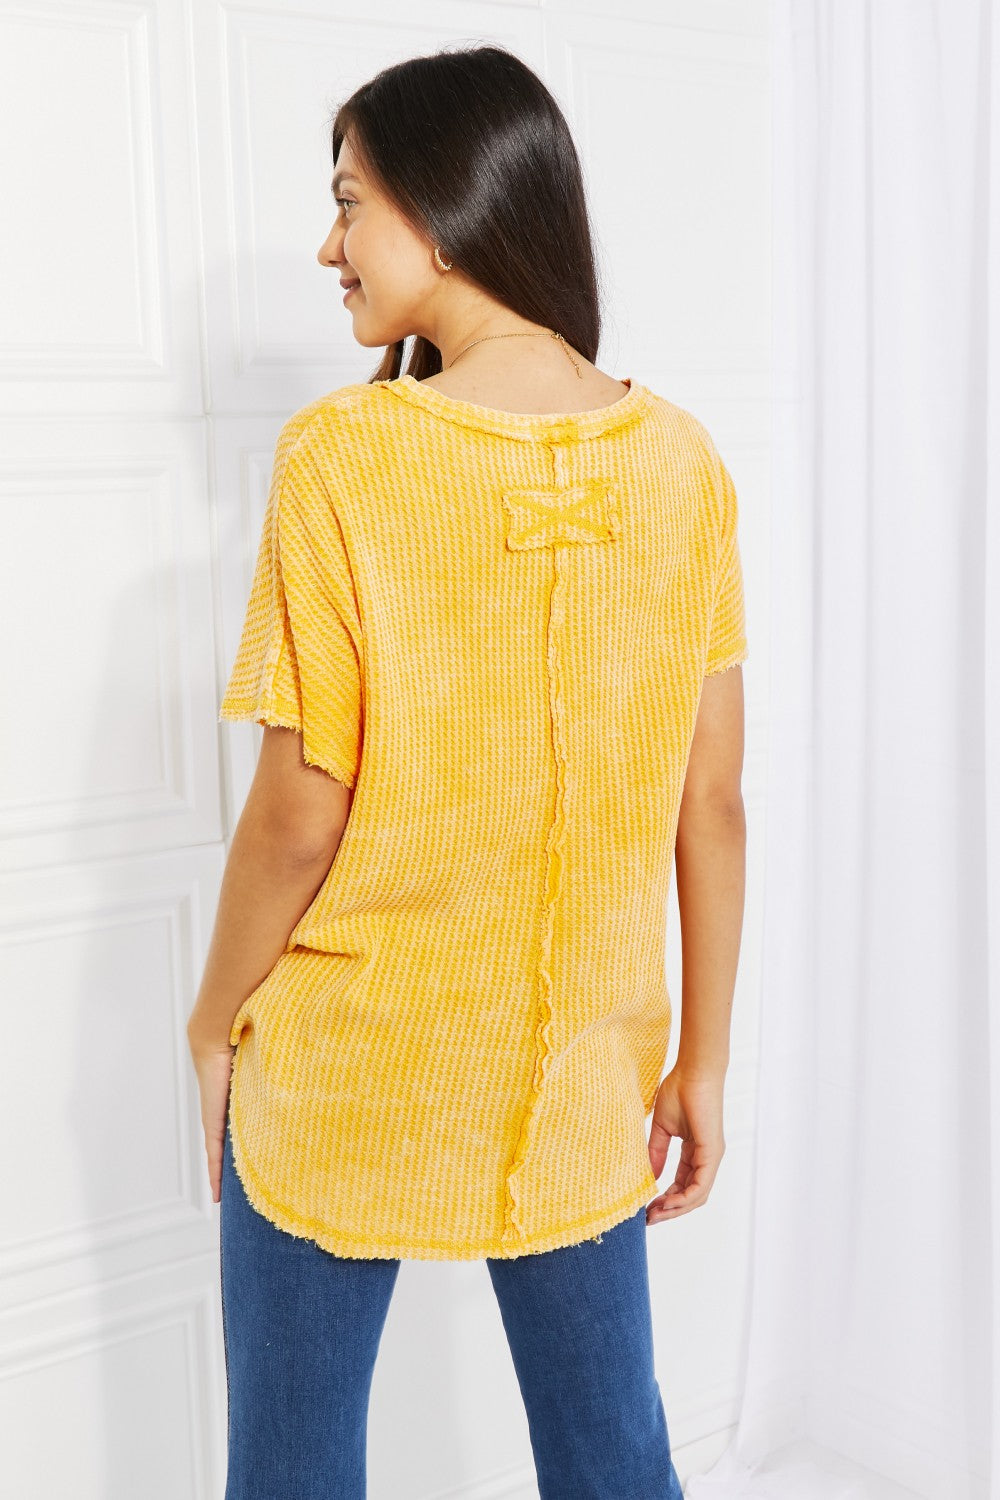 Washed Waffle Knit Top in Yellow Gold - Women’s Clothing & Accessories - Shirts & Tops - 2 - 2024